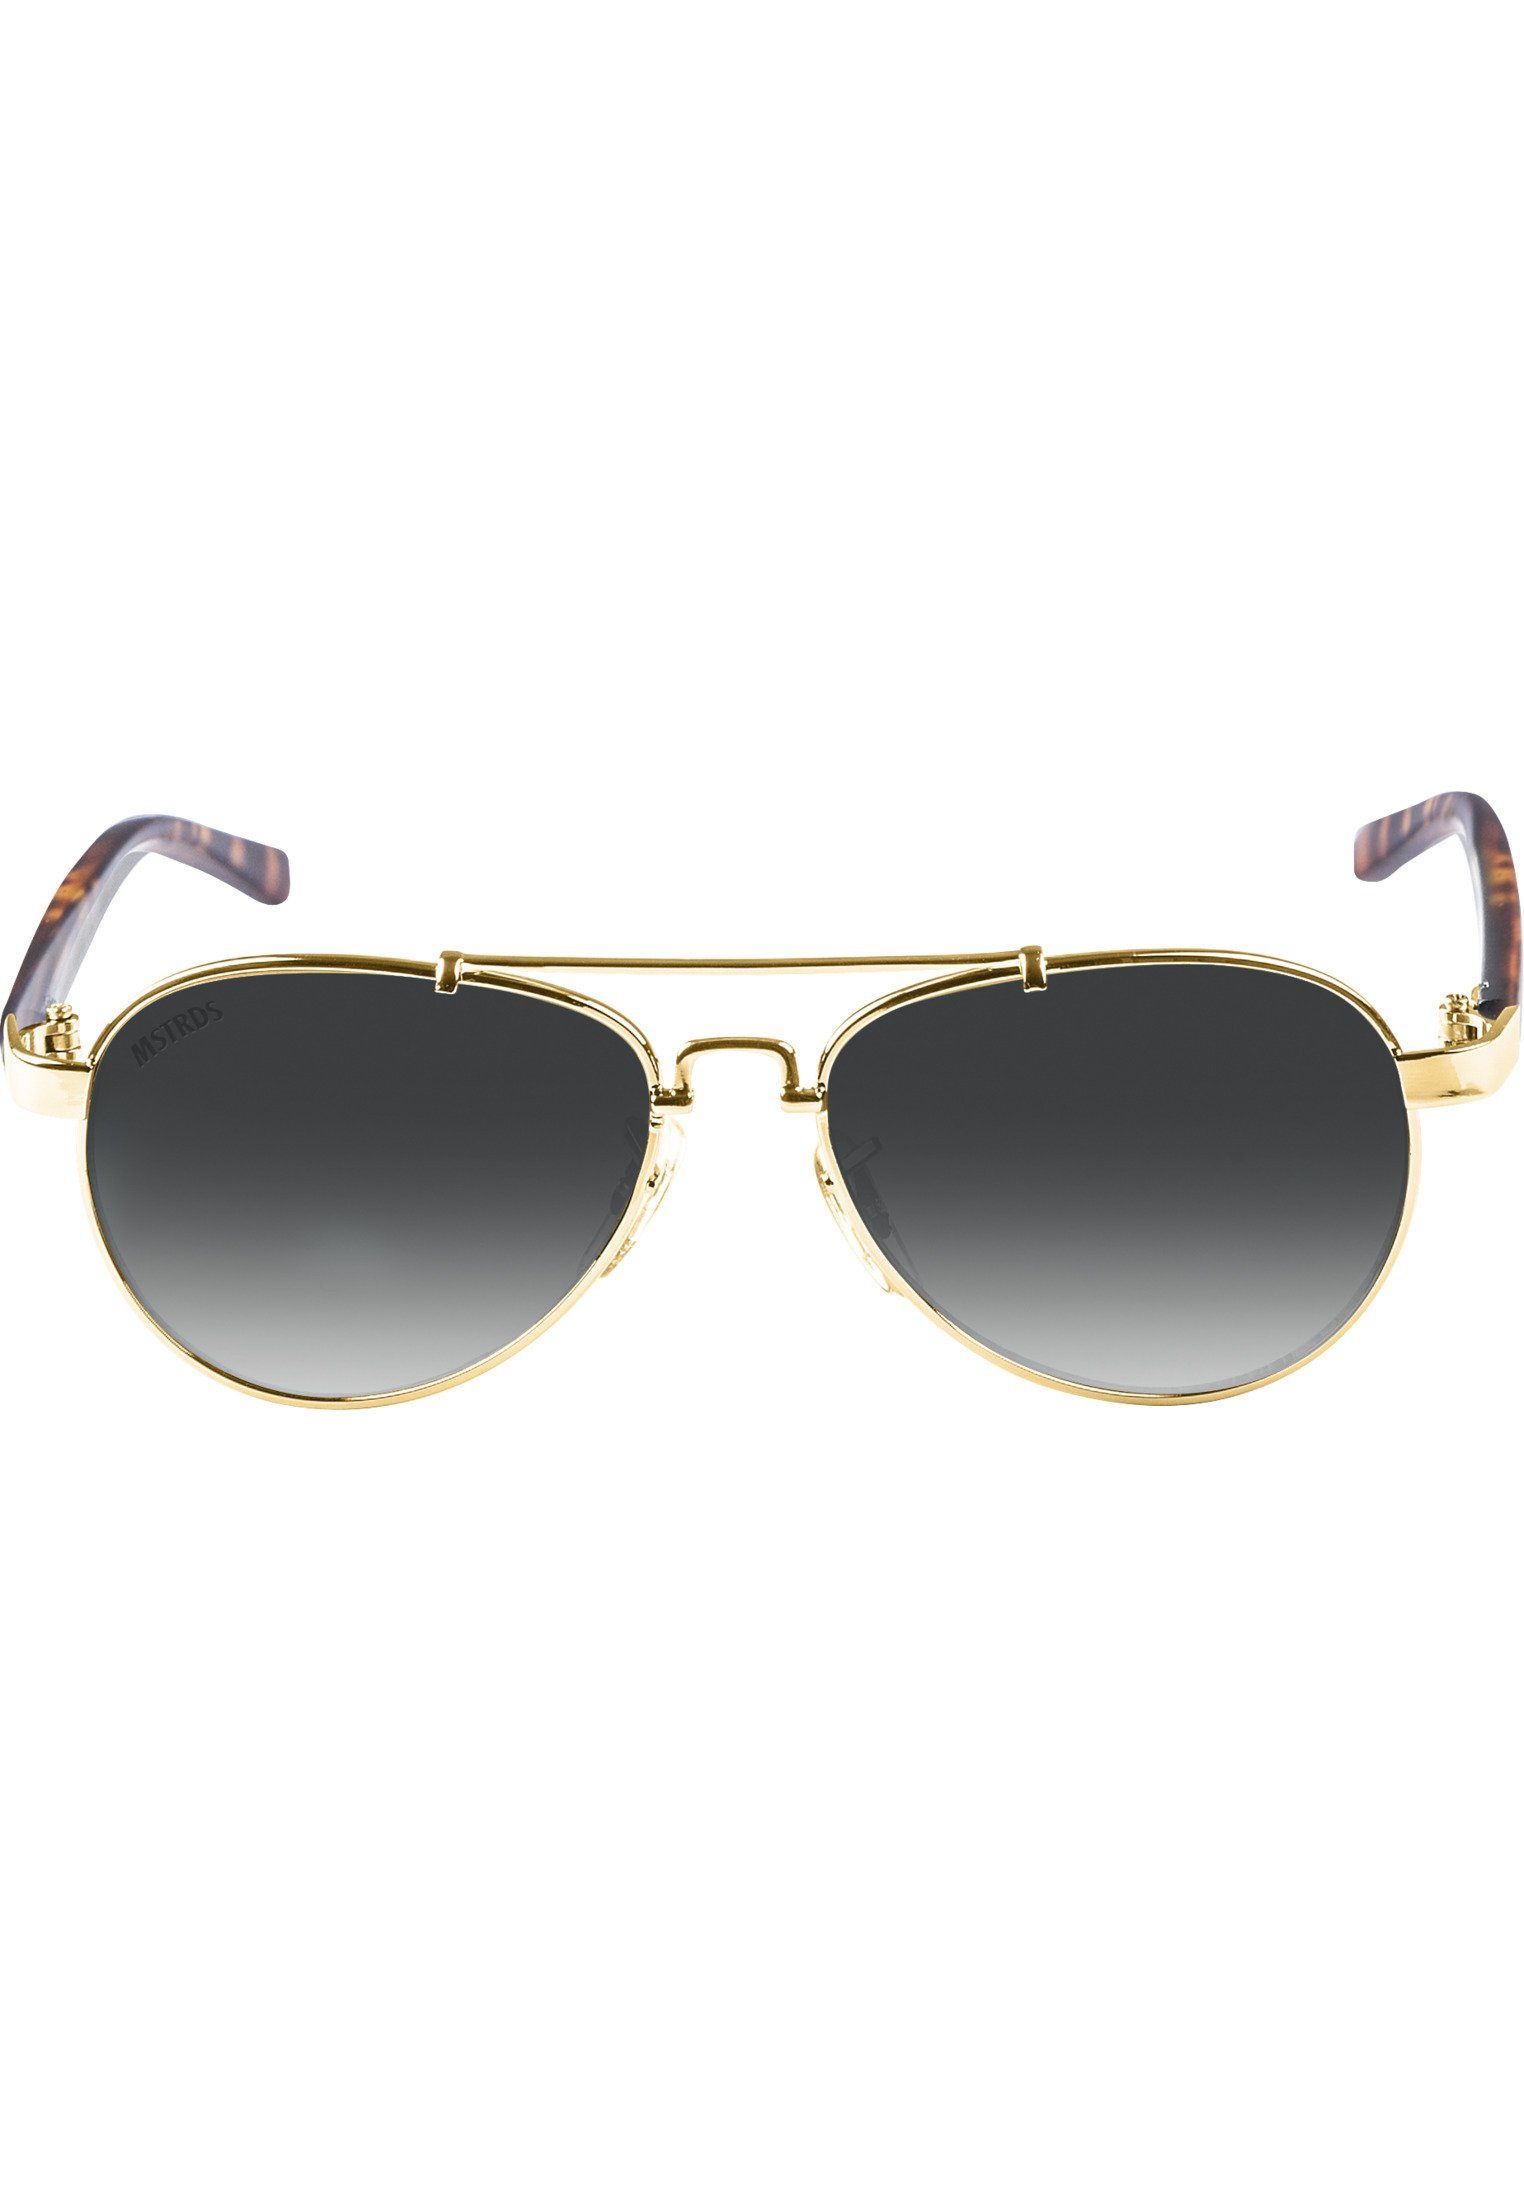 MSTRDS Sonnenbrille Accessoires Mumbo Youth gold/grey